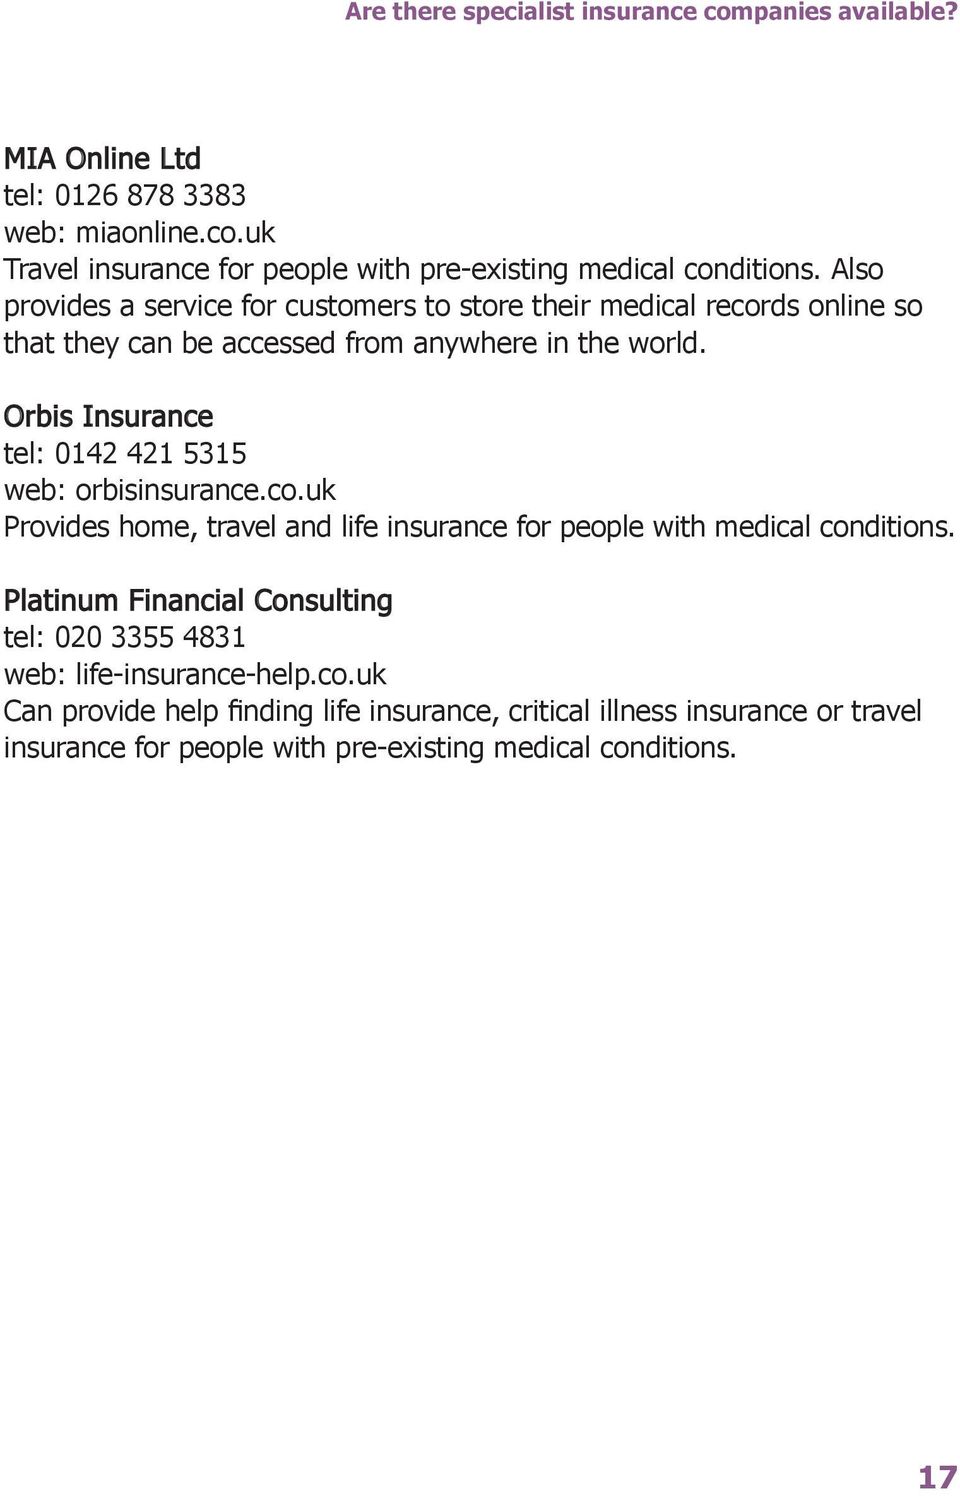 Orbis Insurance tel: 0142 421 5315 web: orbisinsurance.co.uk Provides home, travel and life insurance for people with medical conditions.